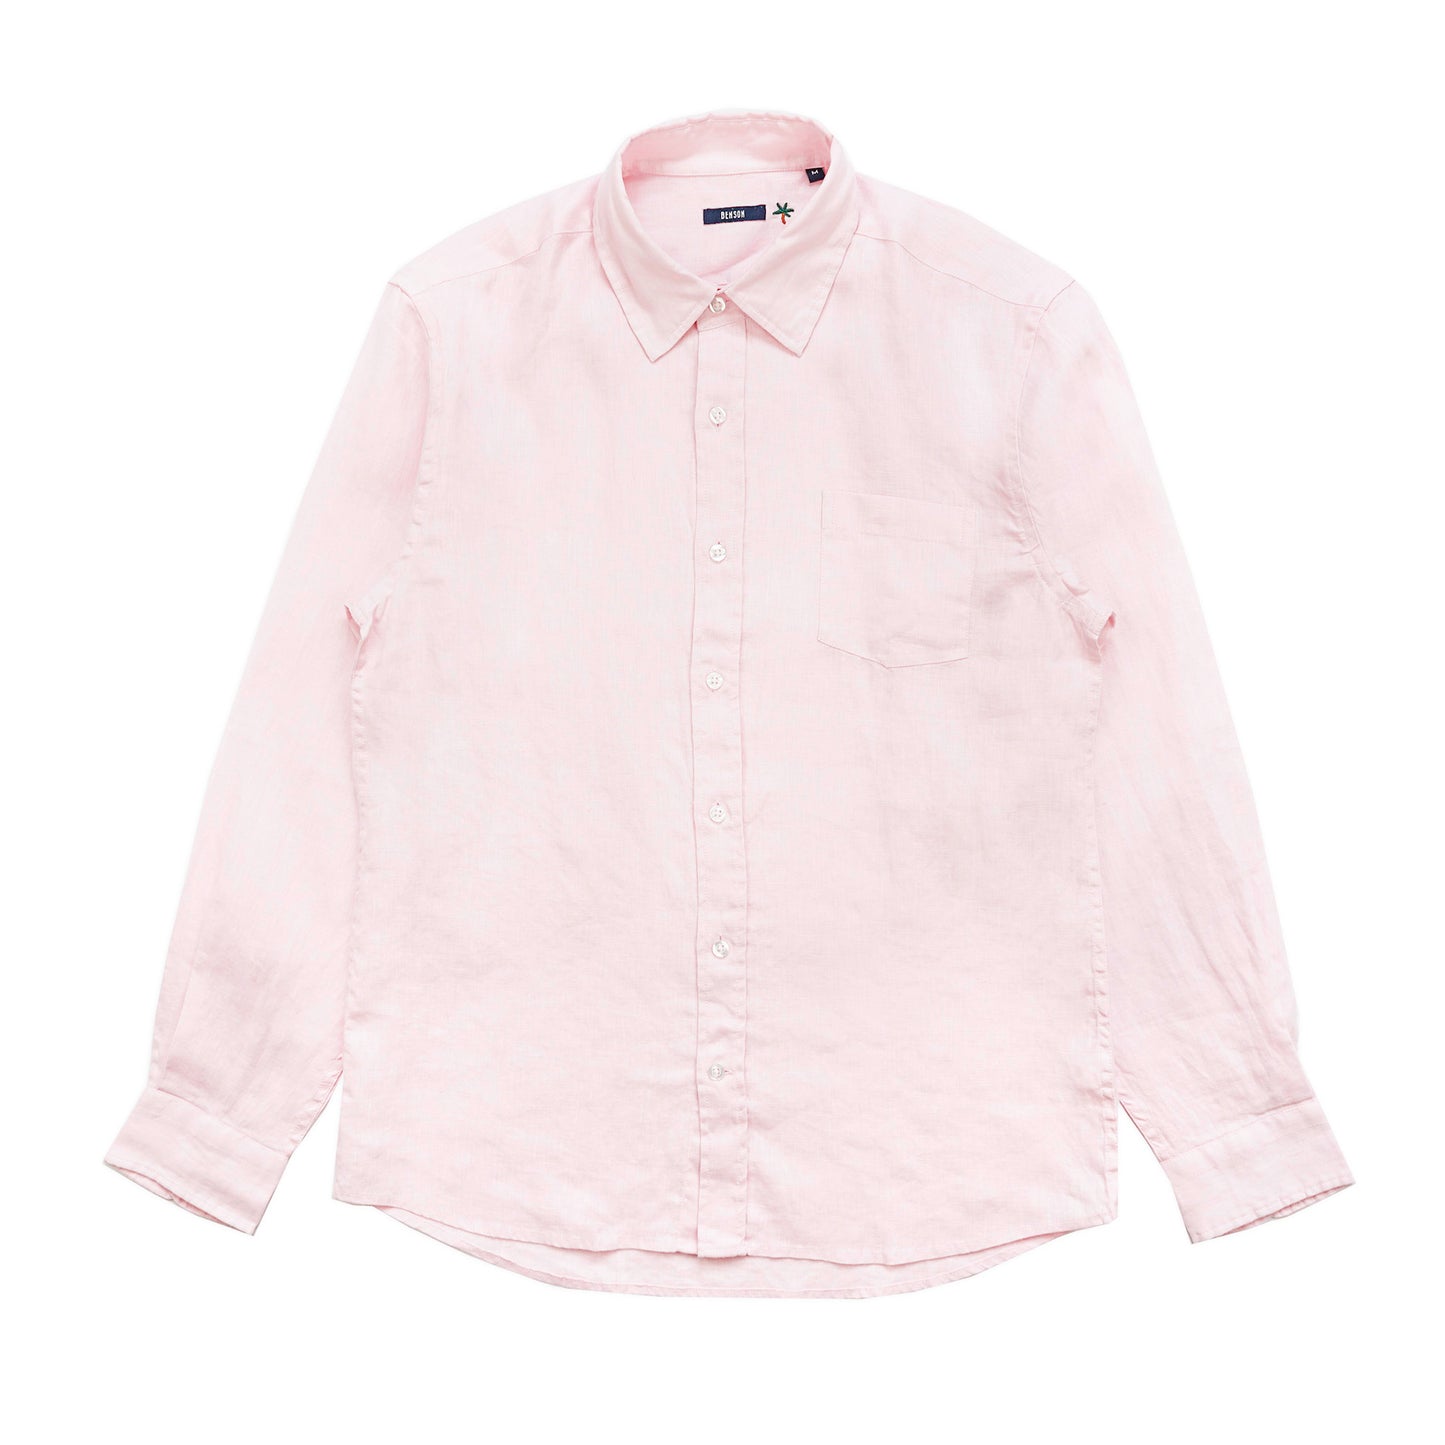 Miami Pale Pink Long Sleeve Linen